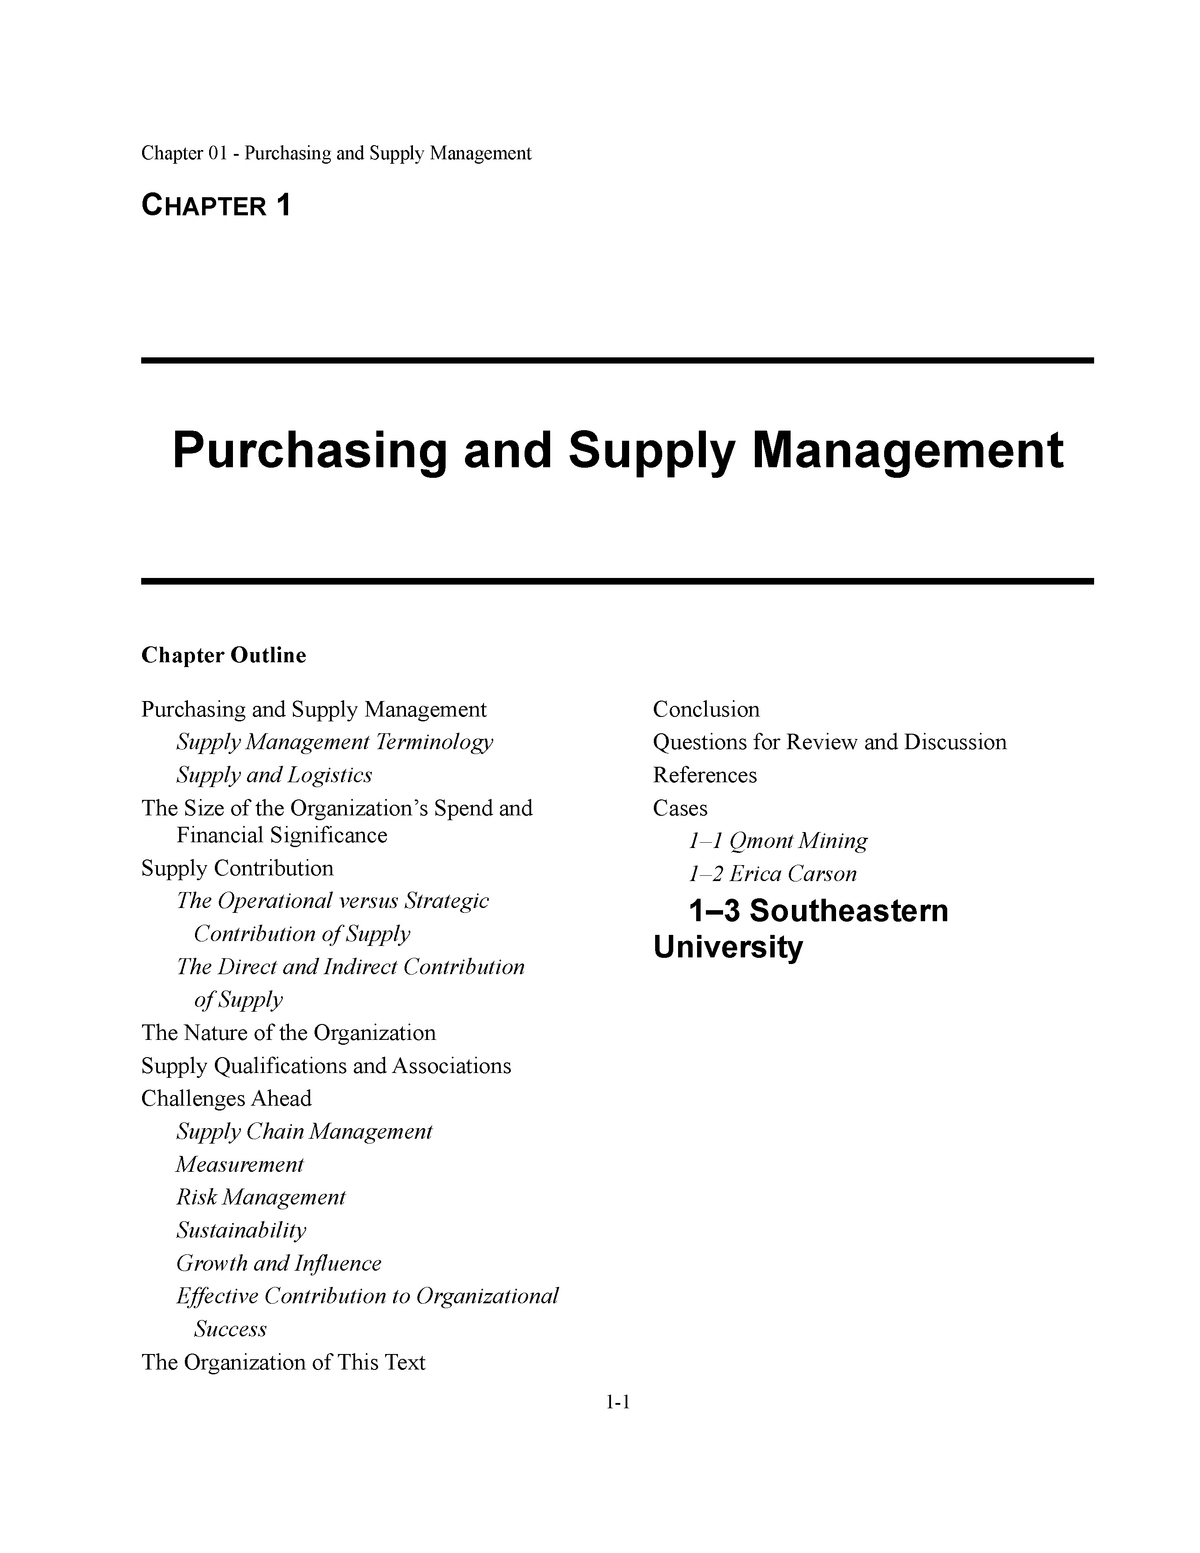 supply chain management at bose corporation case study answers